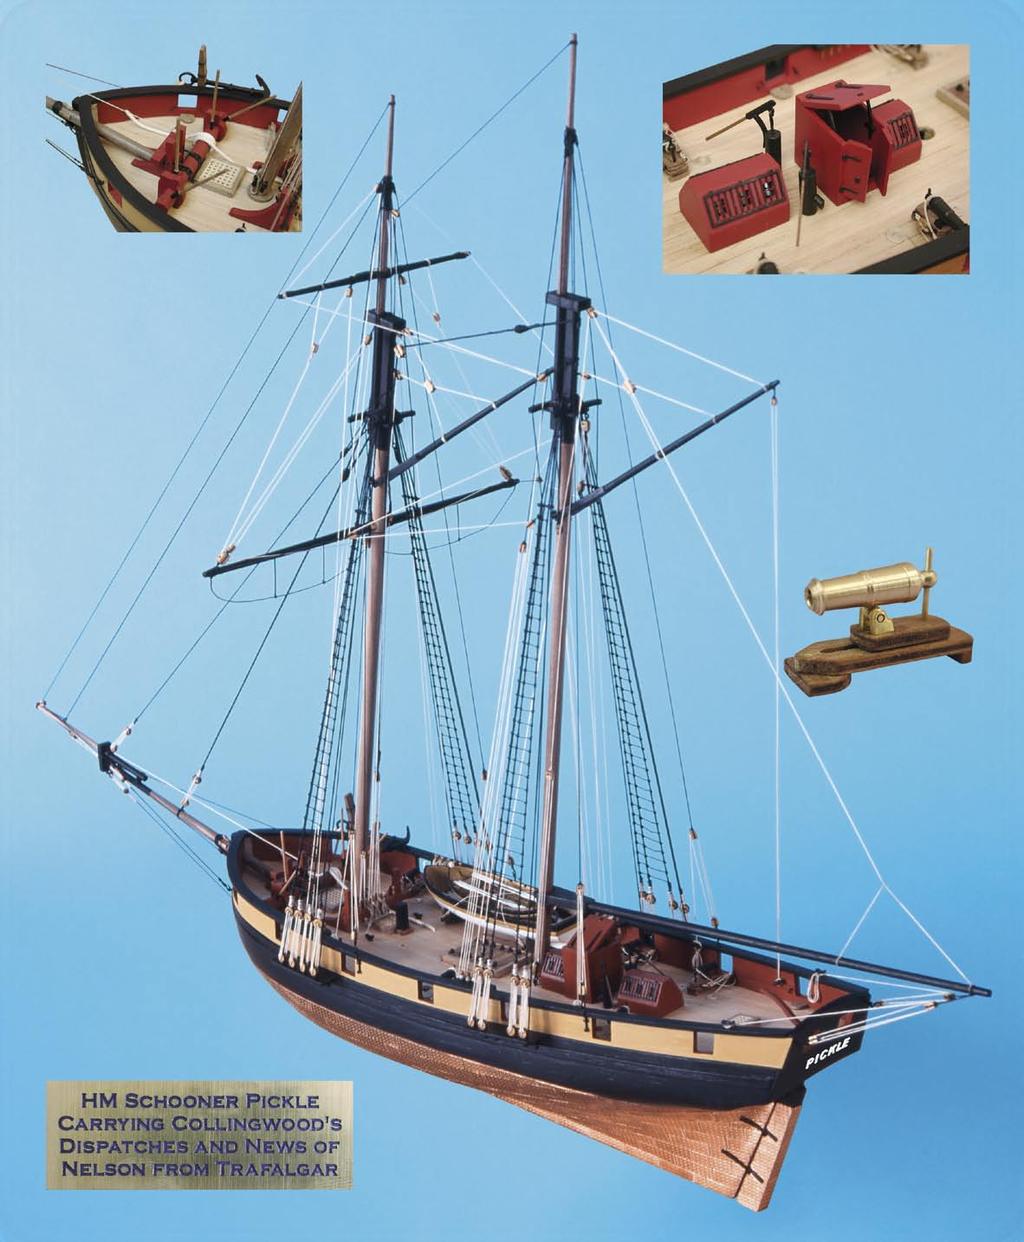 HERITAGE SERIES ~ HM SCHOONER PICKLE Kit includes: Double plank on bulkhead construction in lime and walnut; all decking in high quality Tanganyika strip; 6 x 12pdr turned brass carronades, fully